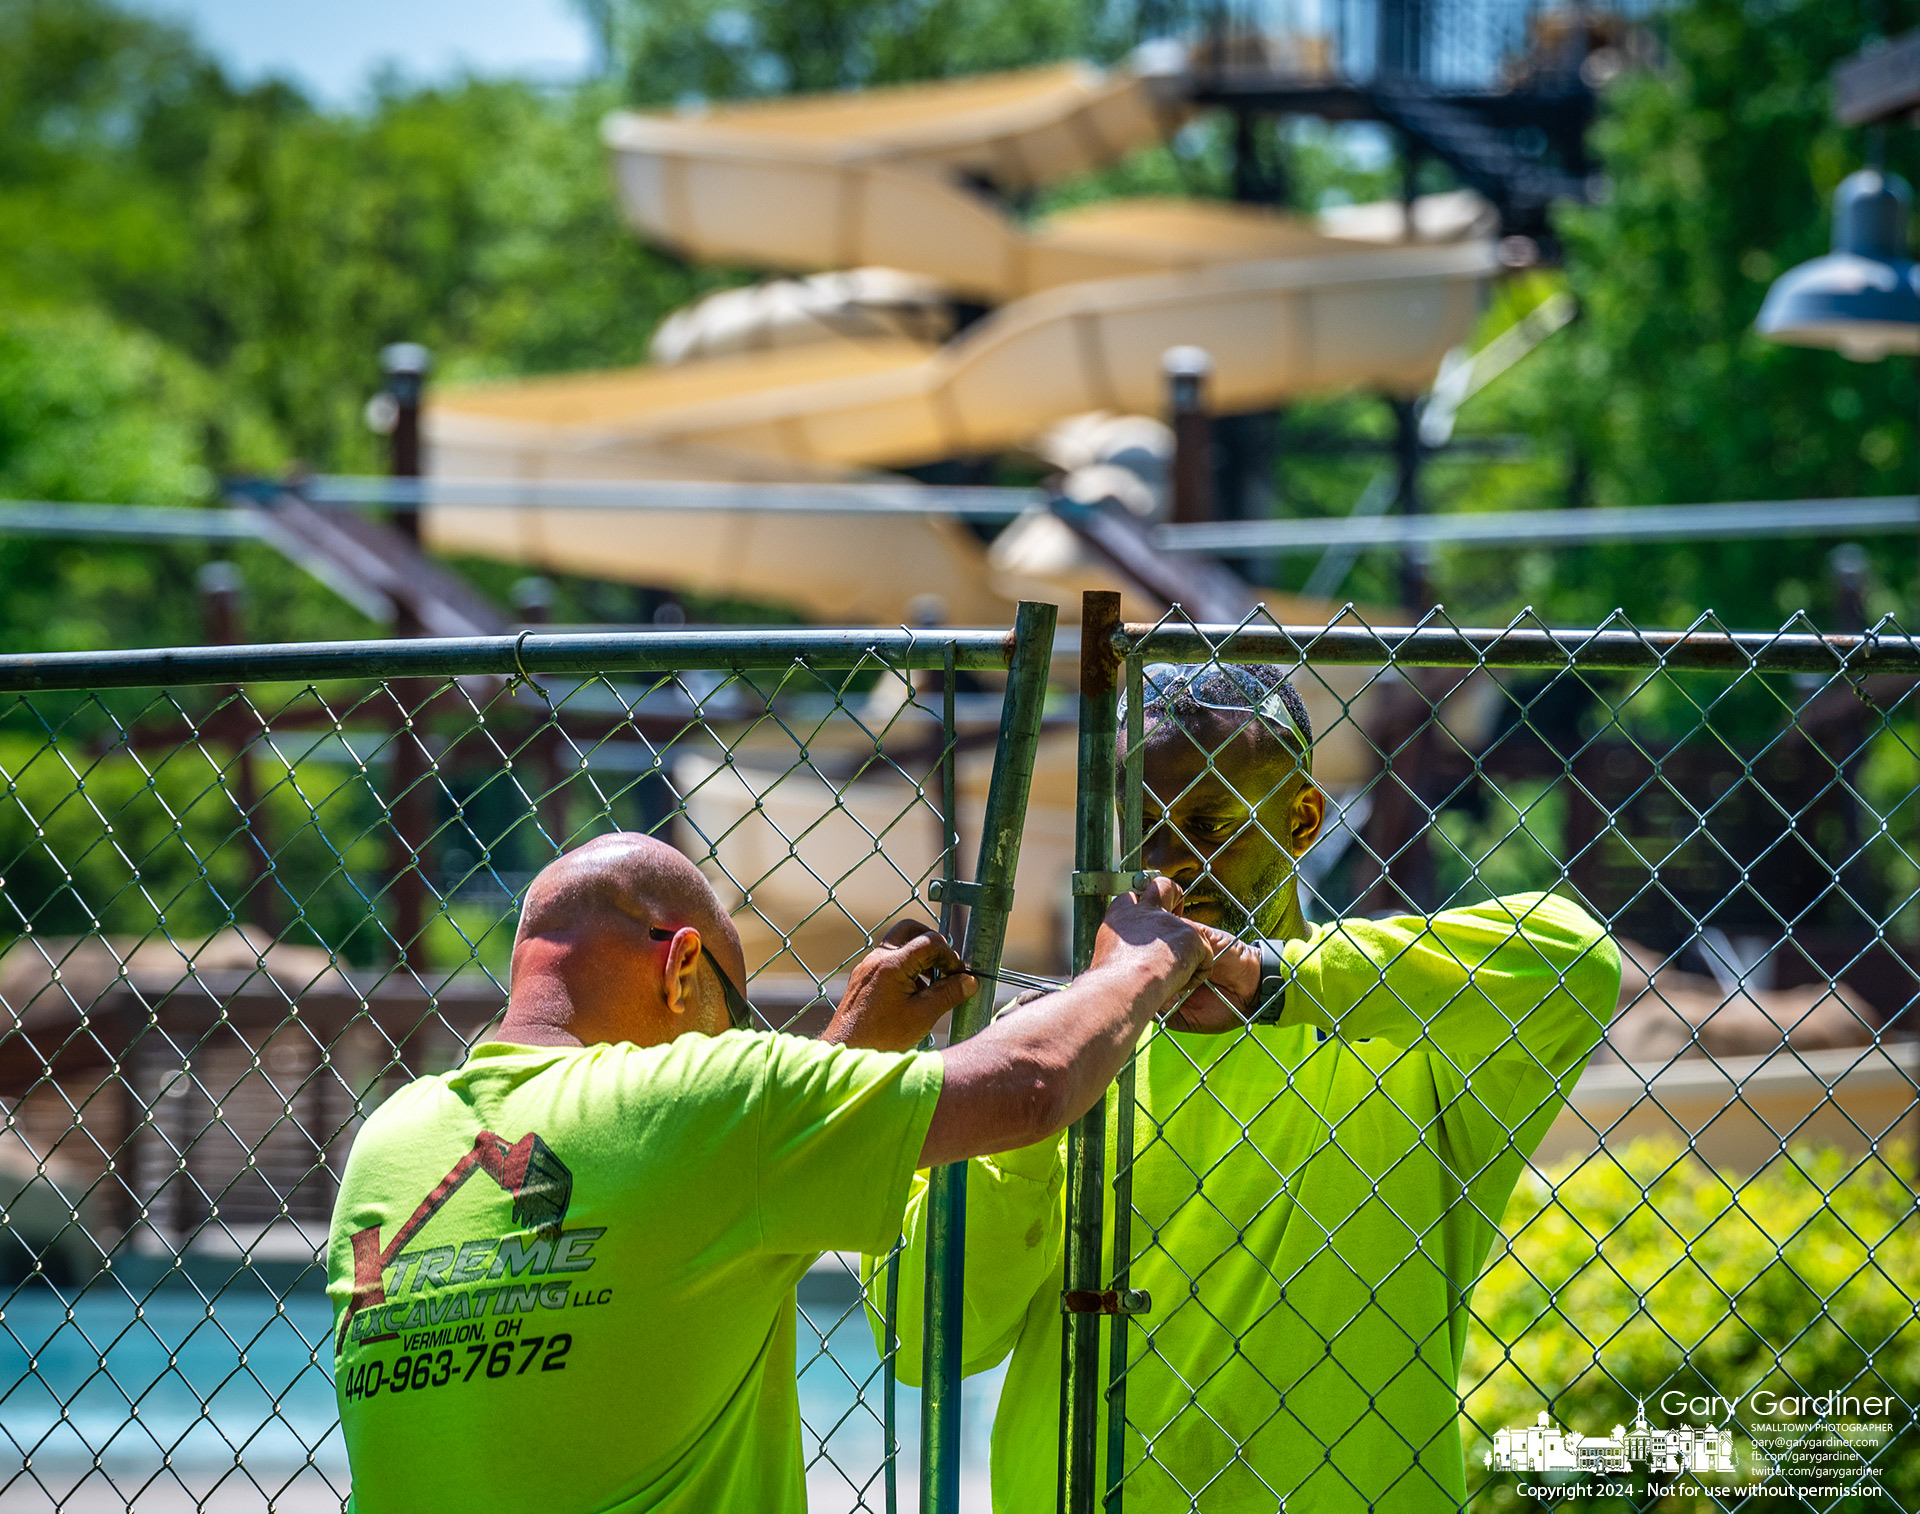 Brad Riggs, left, and R L Williamson join sections of temporary chain-link fencing around a portion of the Highlands pool area as they begin installing a taller, more secure fence to prevent people from entering the pool by climbing the fence. My Final Photo for May 13, 2024.